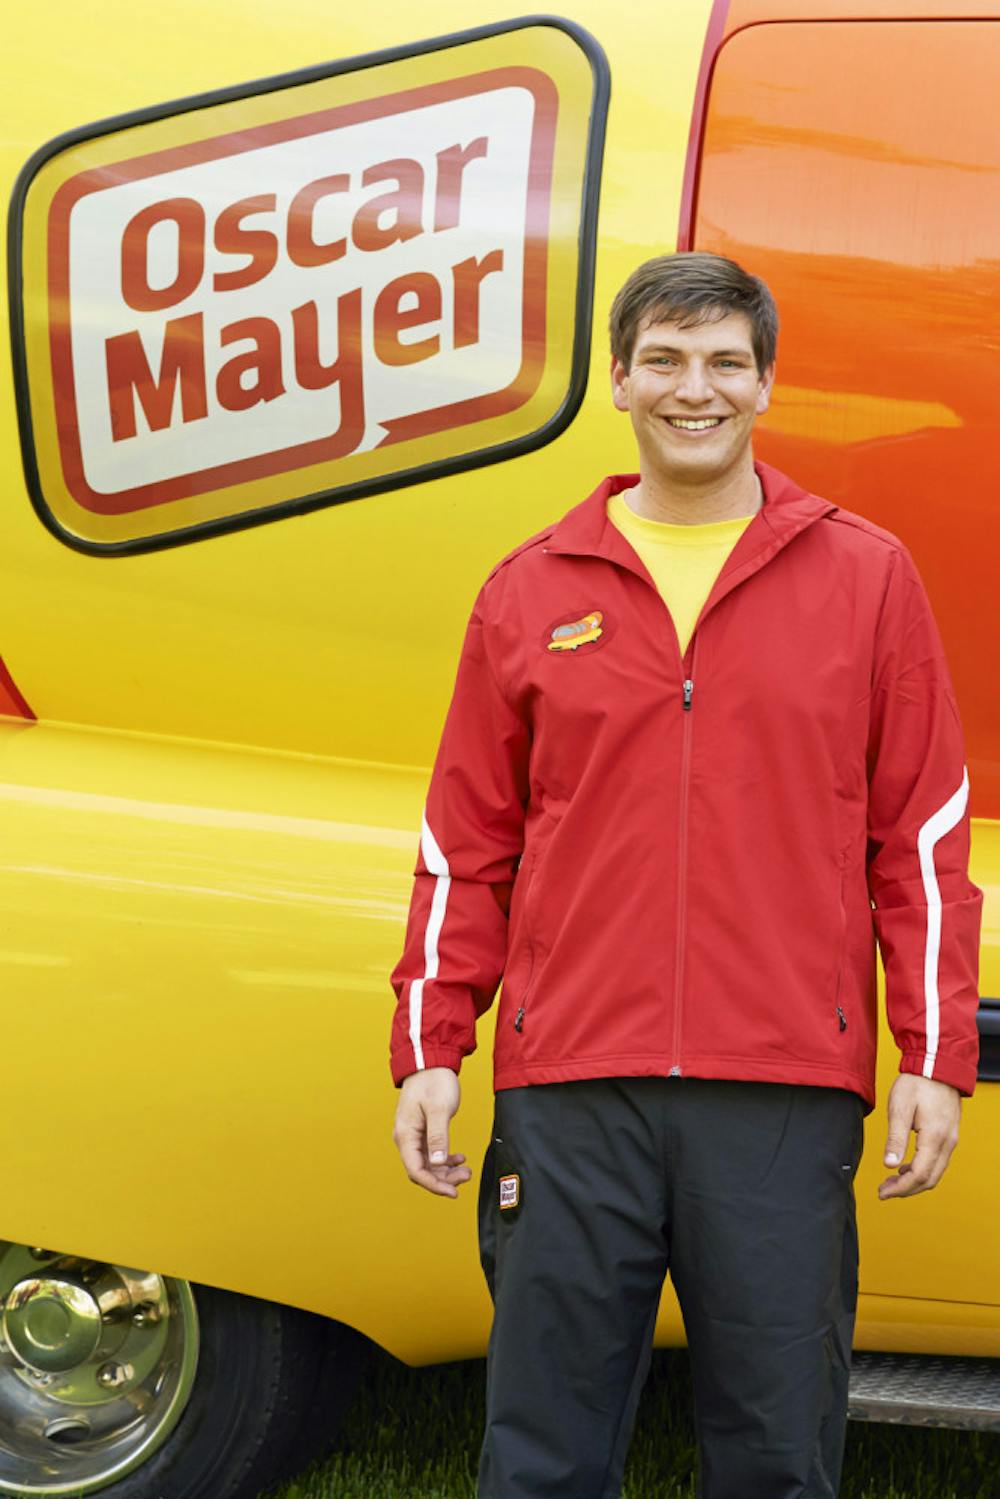 <p>Spencer Smud, the 24-year-old “Hotdogger” who drives one of the Wienermobiles, poses for a photo in front of the hot dog-shaped vehicle.</p>